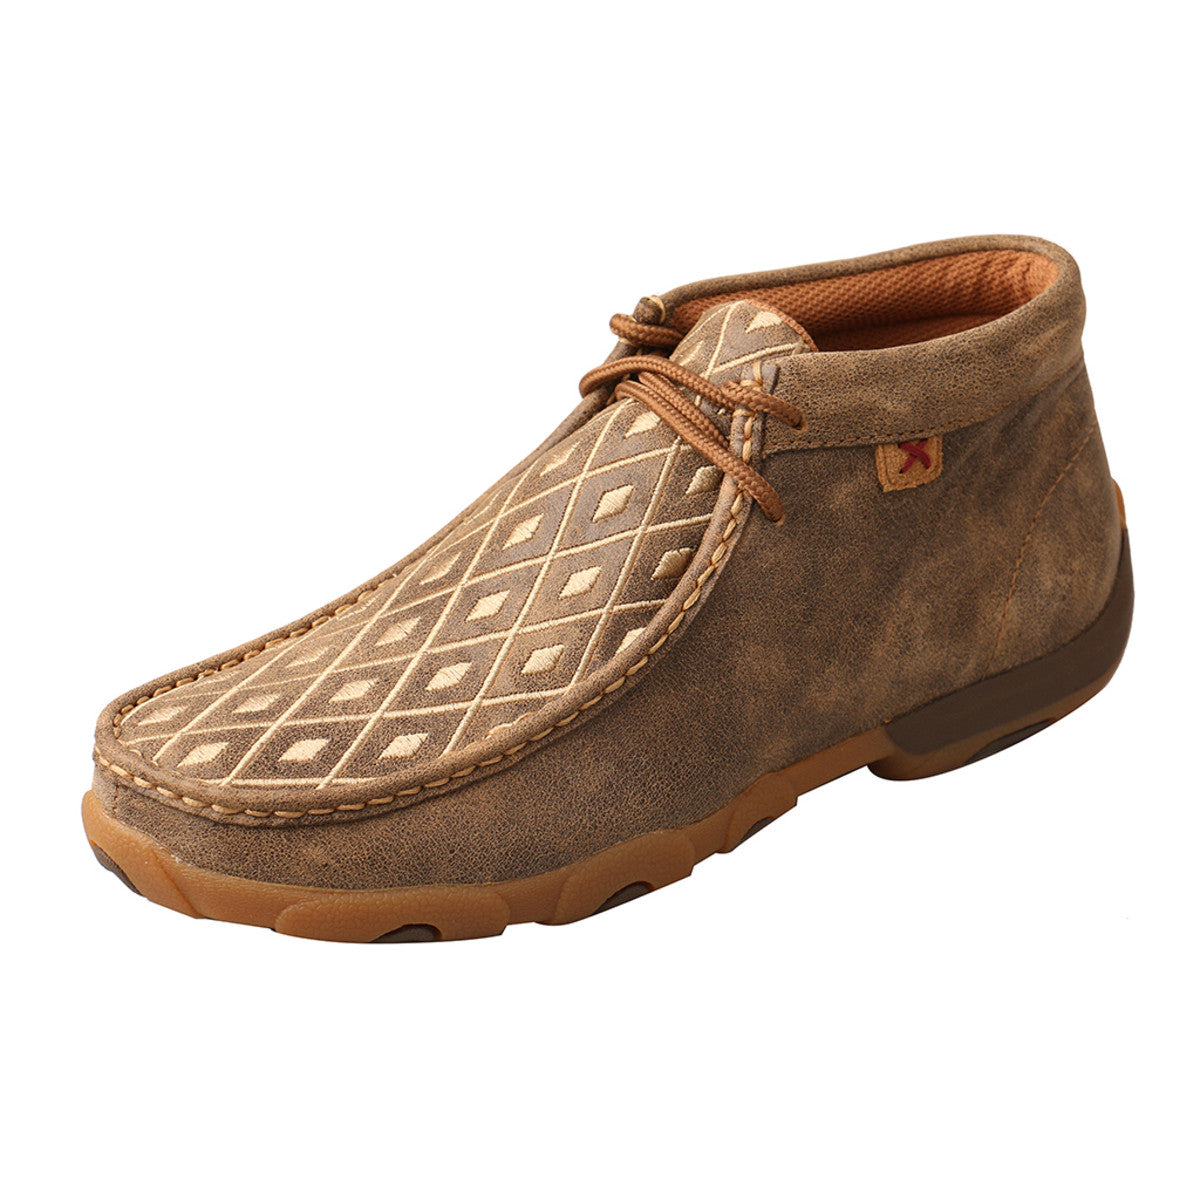 Women's Twisted X Chukka Driving Moccasins Shoe in Bomber & Tan from the side view